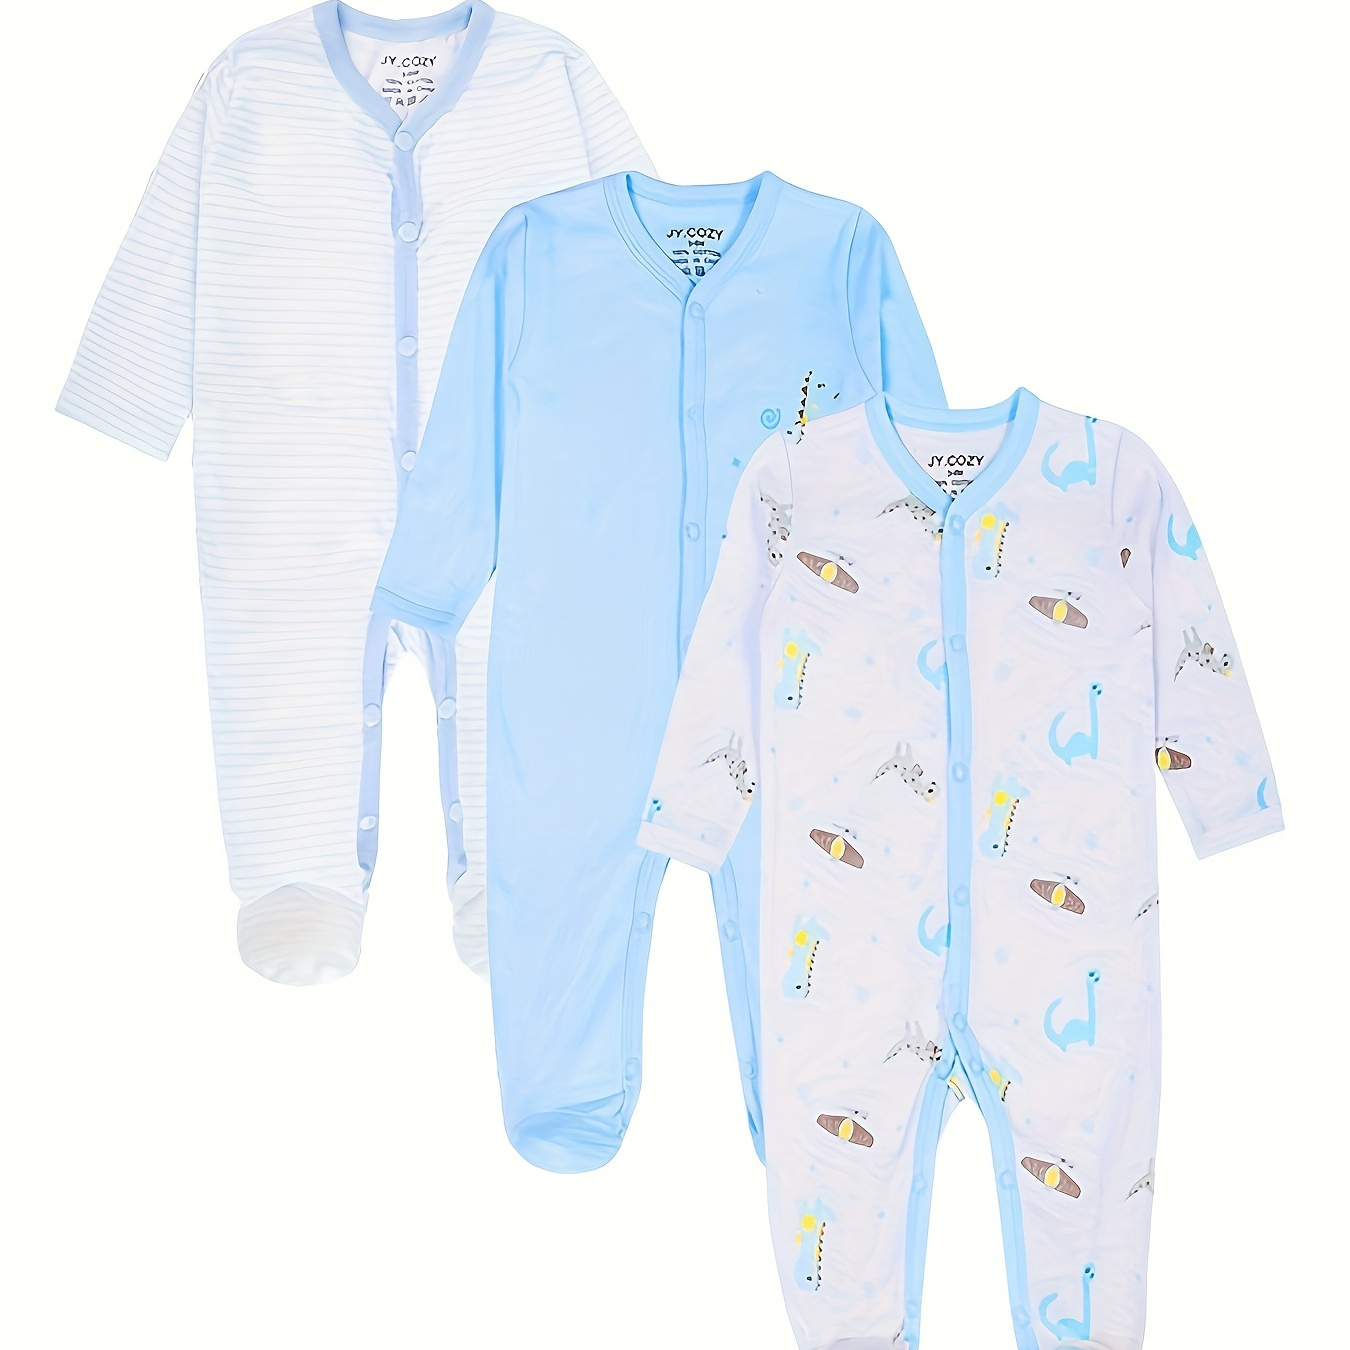 

Baby Boy's Long Sleeve Cotton Rompers Three-piece Set, Pregnancy Gift